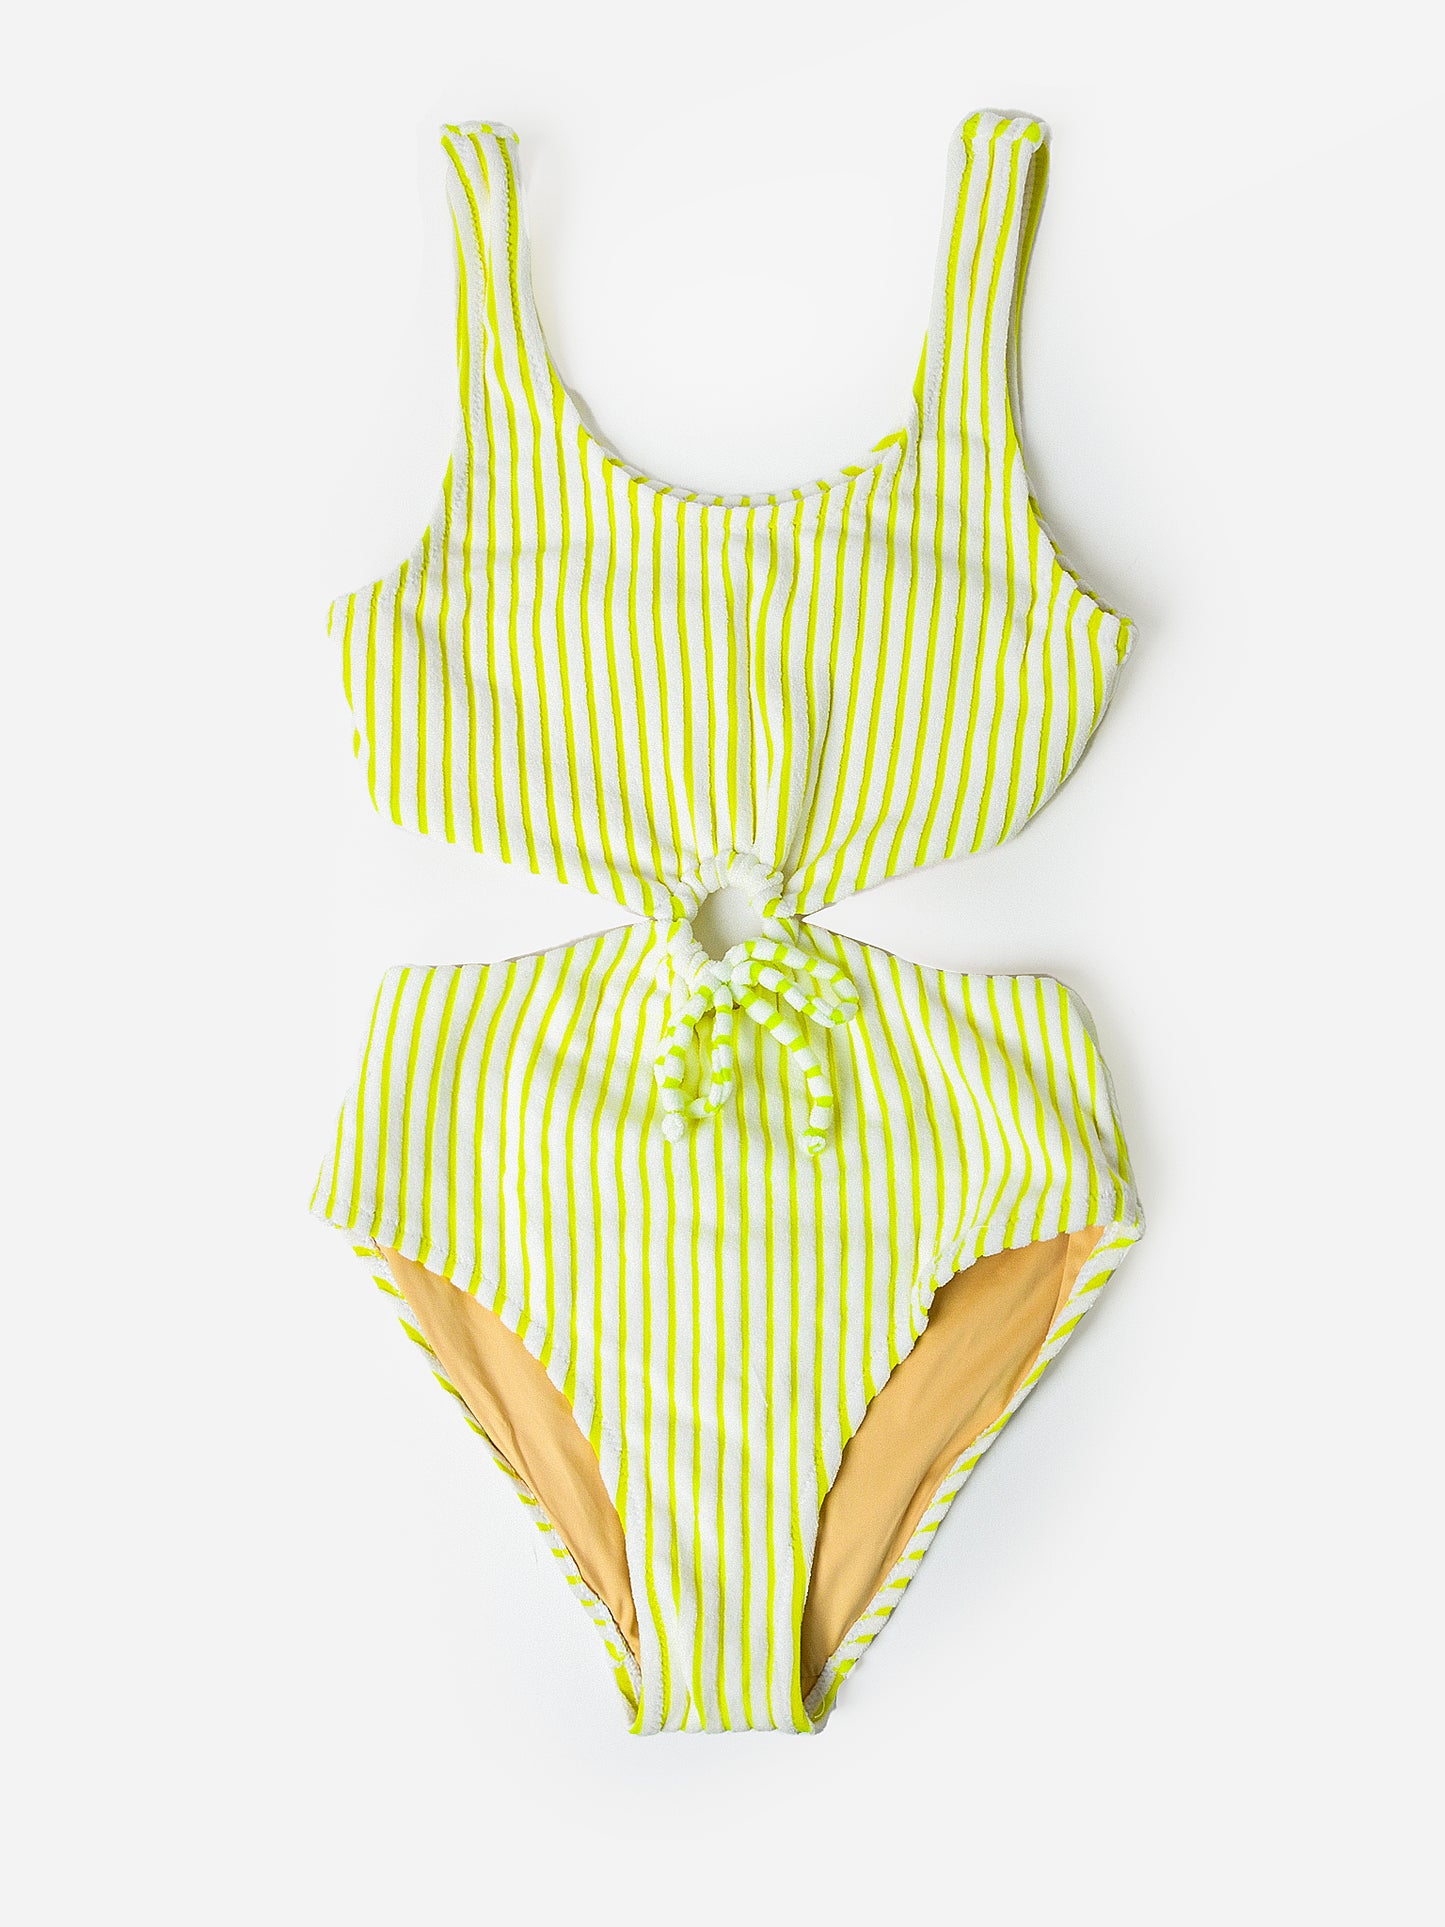 Shade Critters Girls' Terry Lemon Stripe Cinched Monokini One-Piece Swimsuit